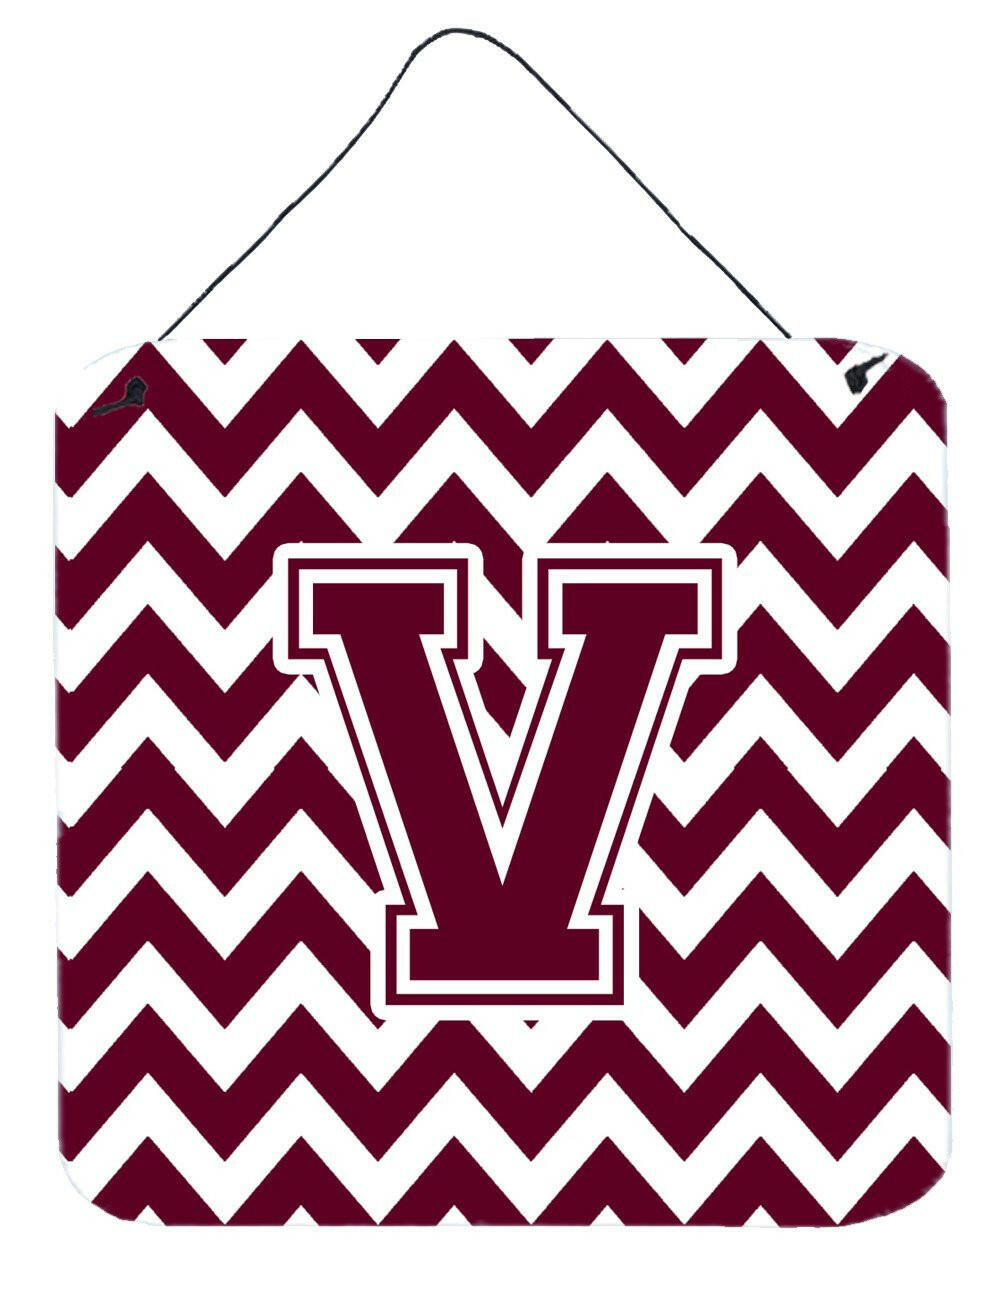 Letter V Chevron Maroon and White  Wall or Door Hanging Prints CJ1051-VDS66 by Caroline's Treasures